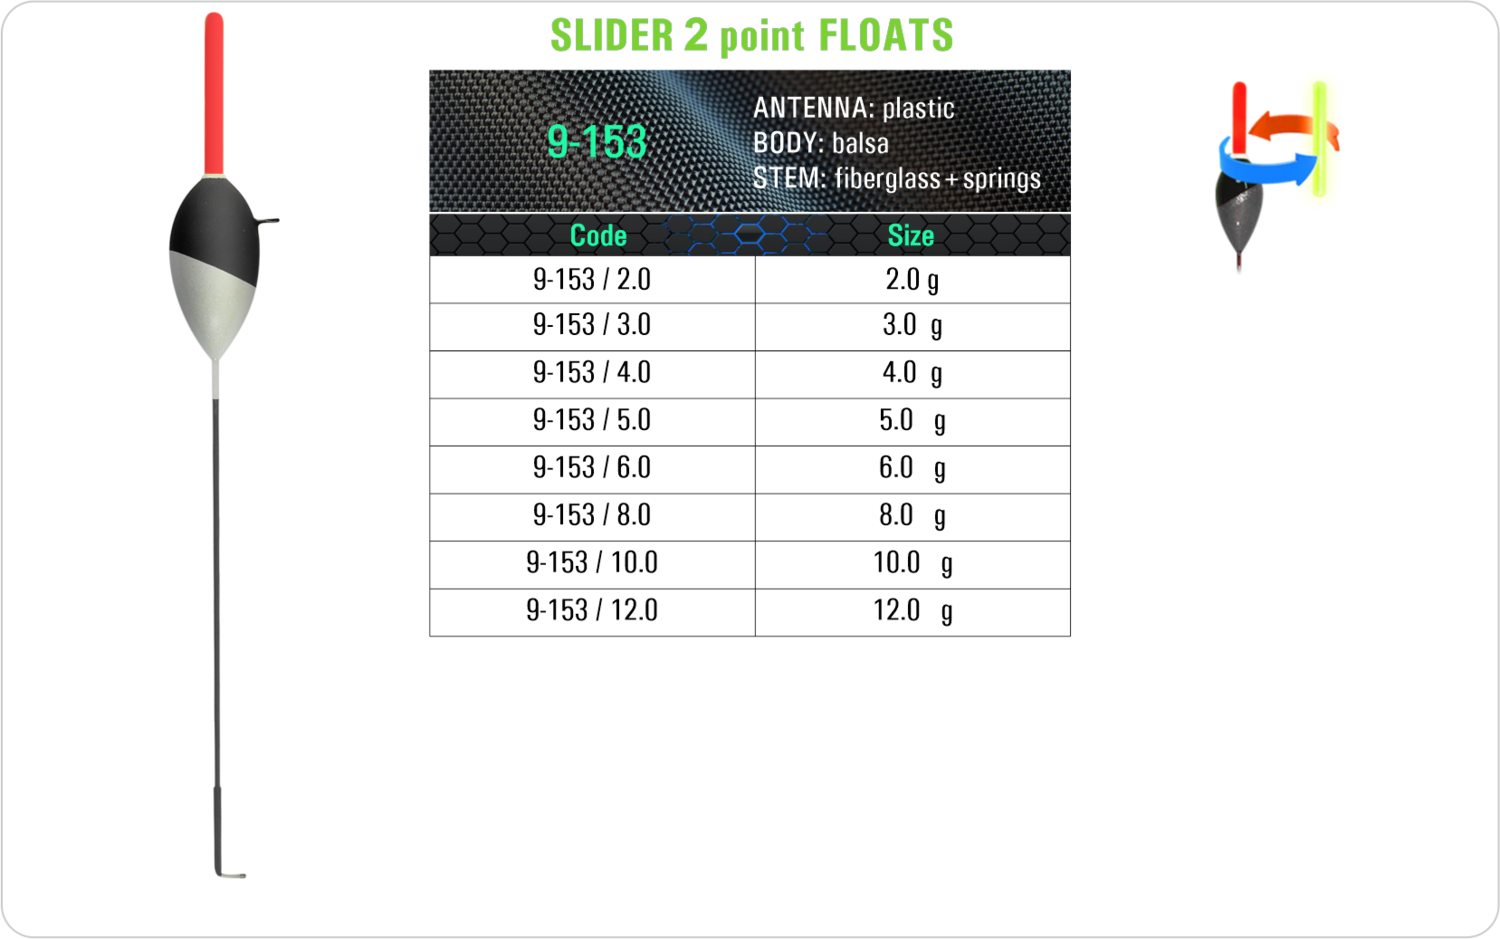 SF 9-153 - Lake and river float model and table containing an additional information about this float with different codes, sizes, types of the body, the stem and the antenna of the float.